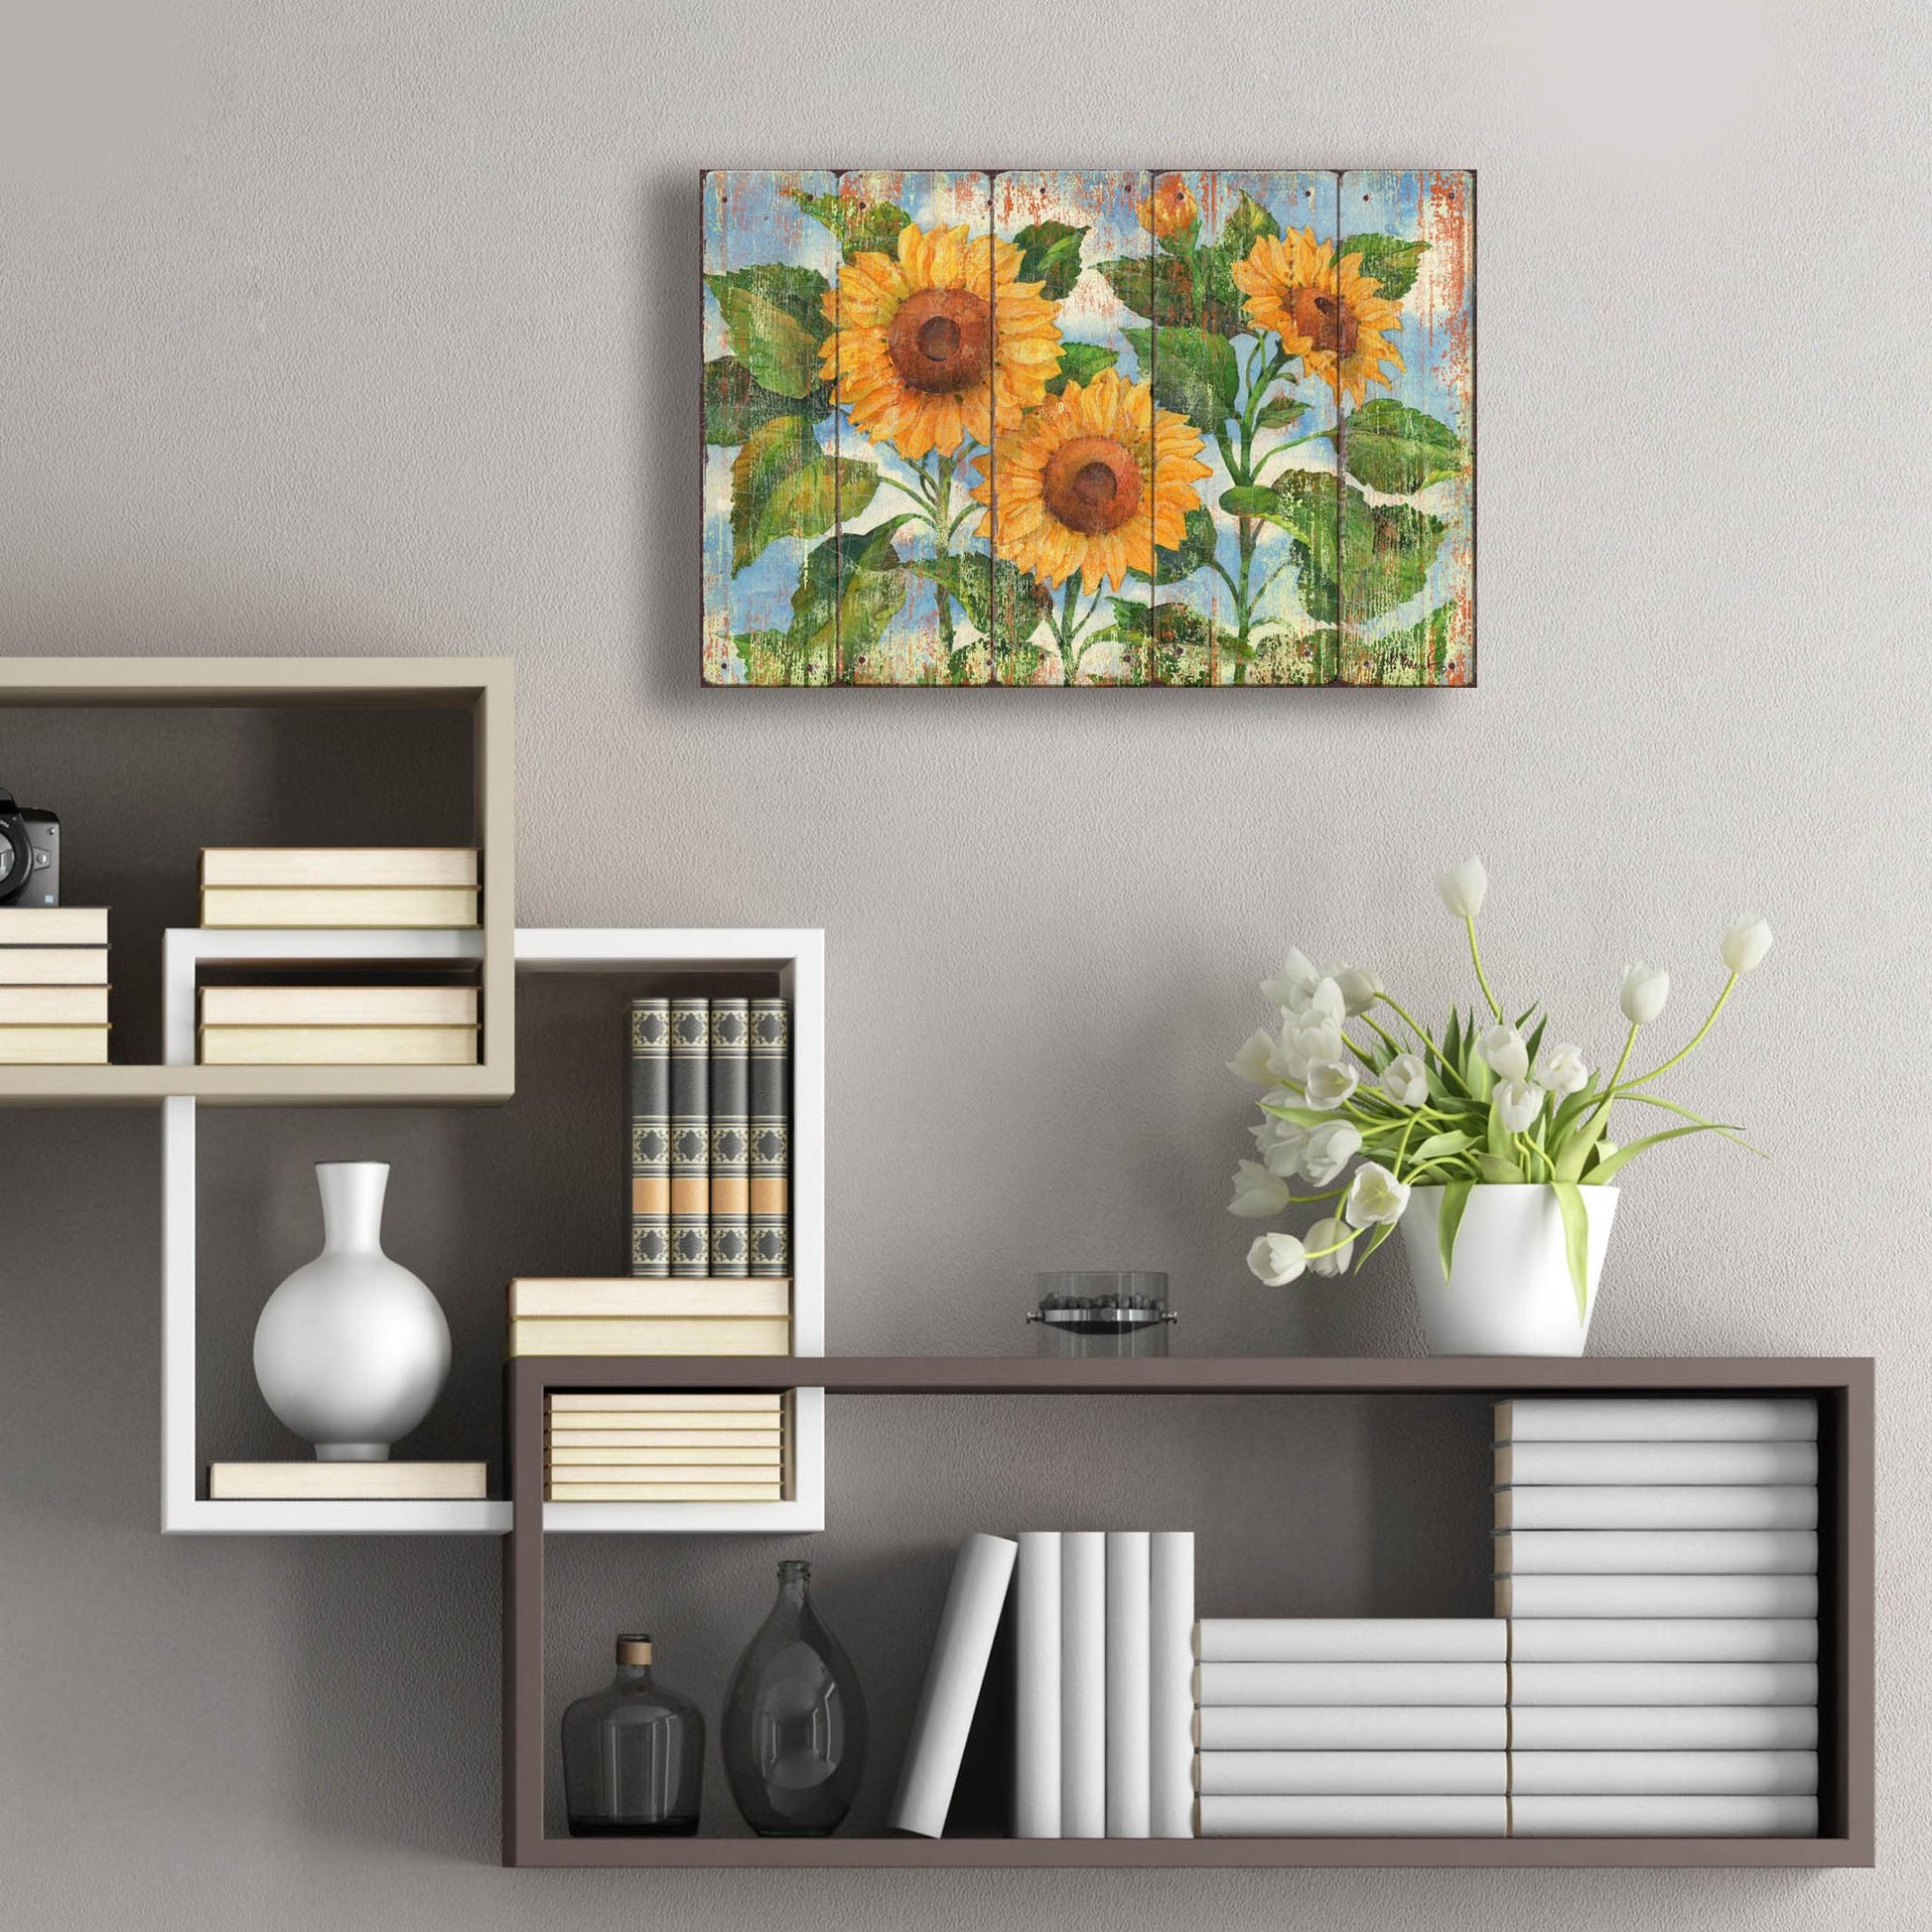 Epic Art 'Summer Sunflowers - Distressed' by Paul Brent, Acrylic Glass Wall Art,24x16